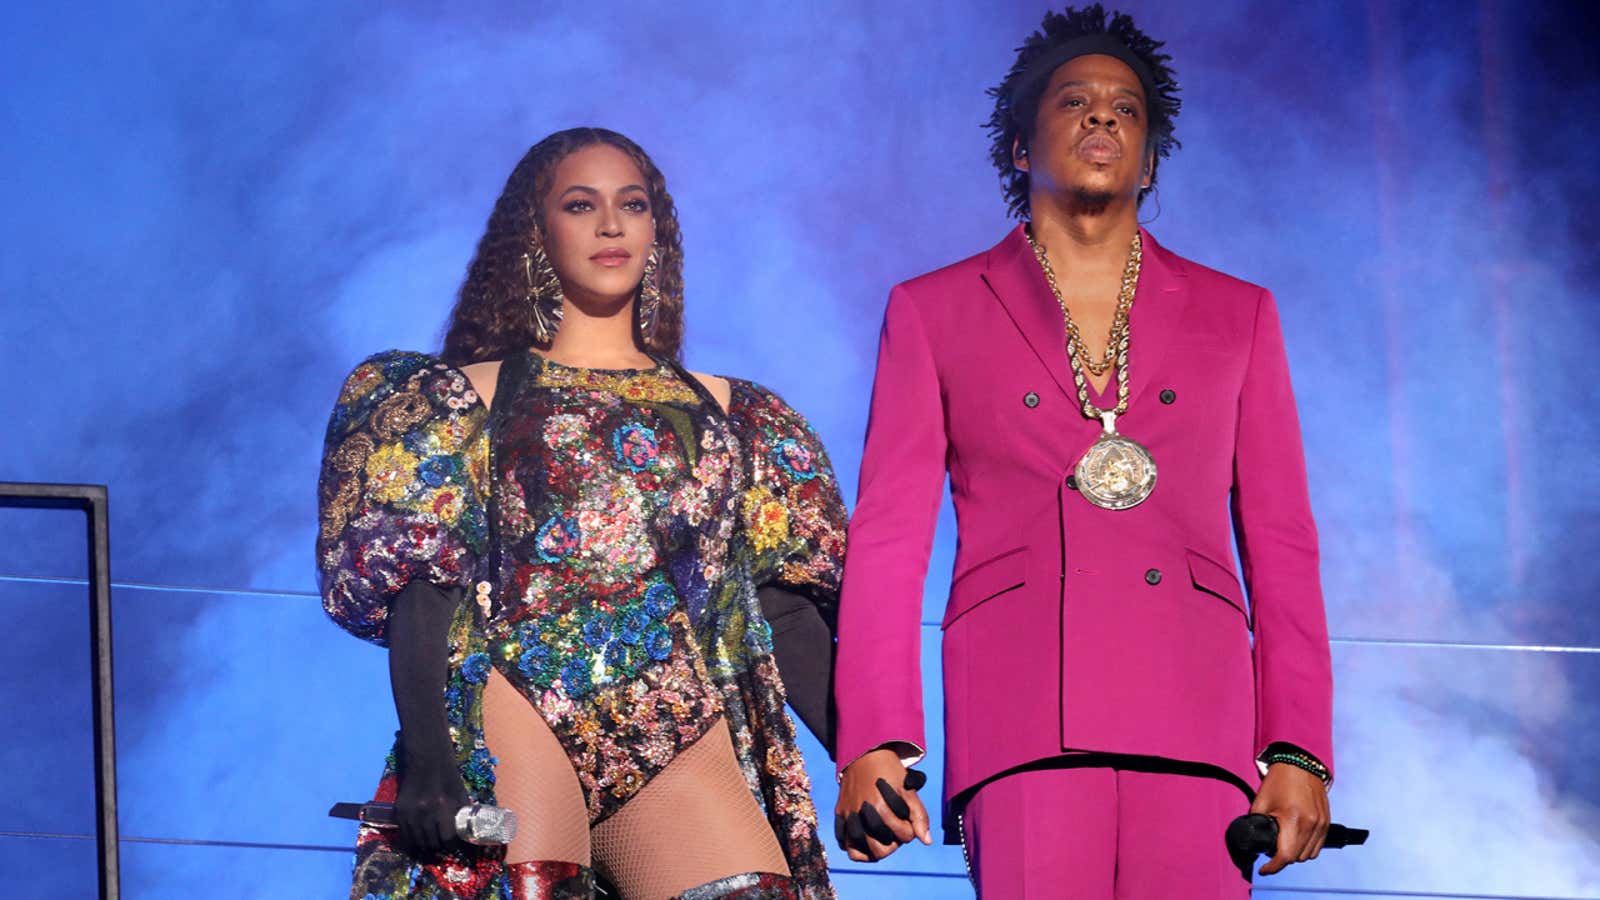 Global Citizen Beyoncé and Jay-Z fans mugged in South Africa